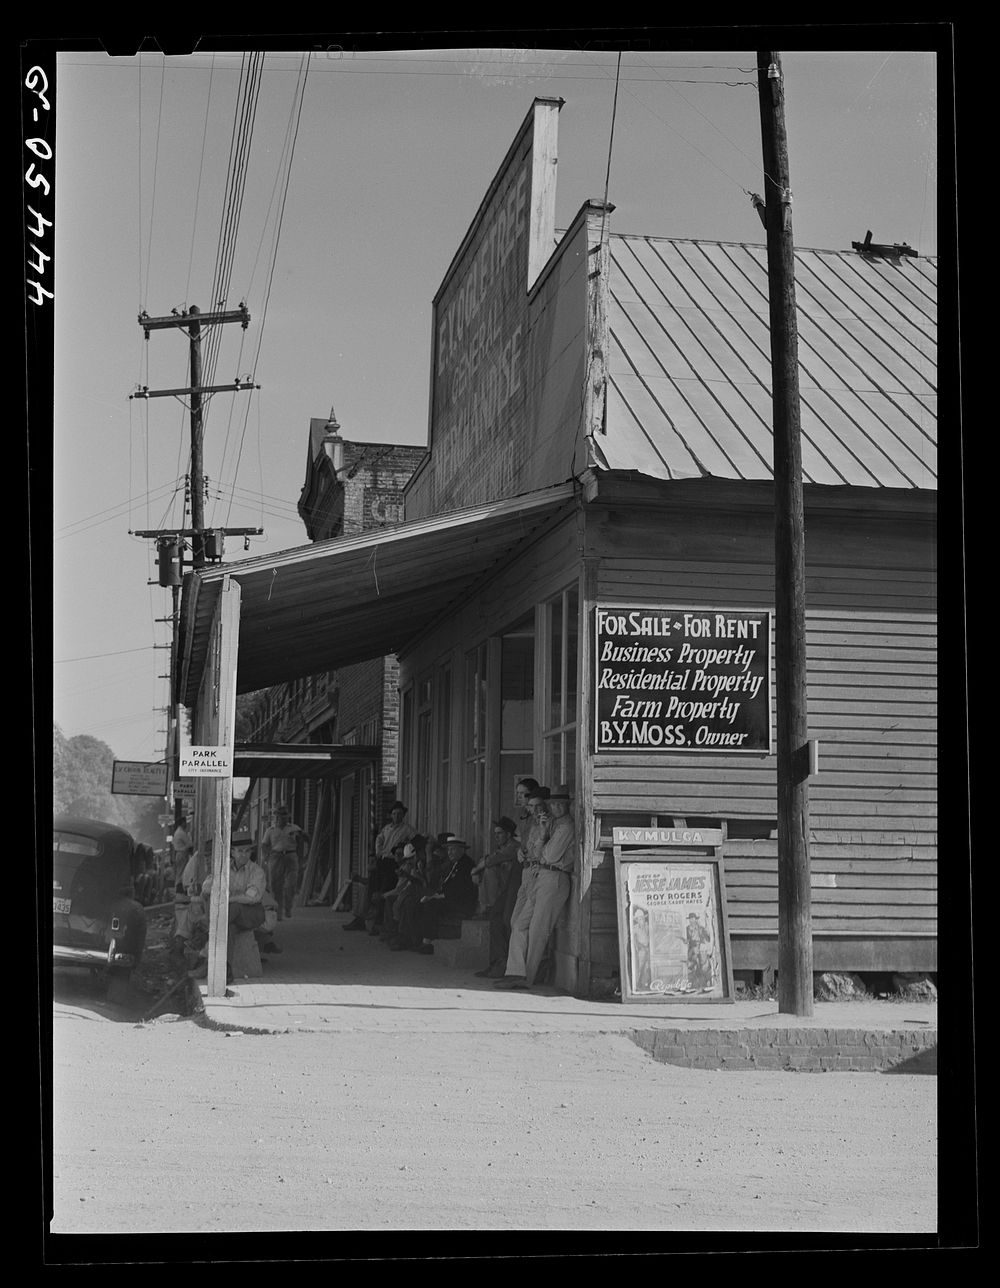 Corner on the main street of Childersburg, Alabama. Sourced from the Library of Congress.